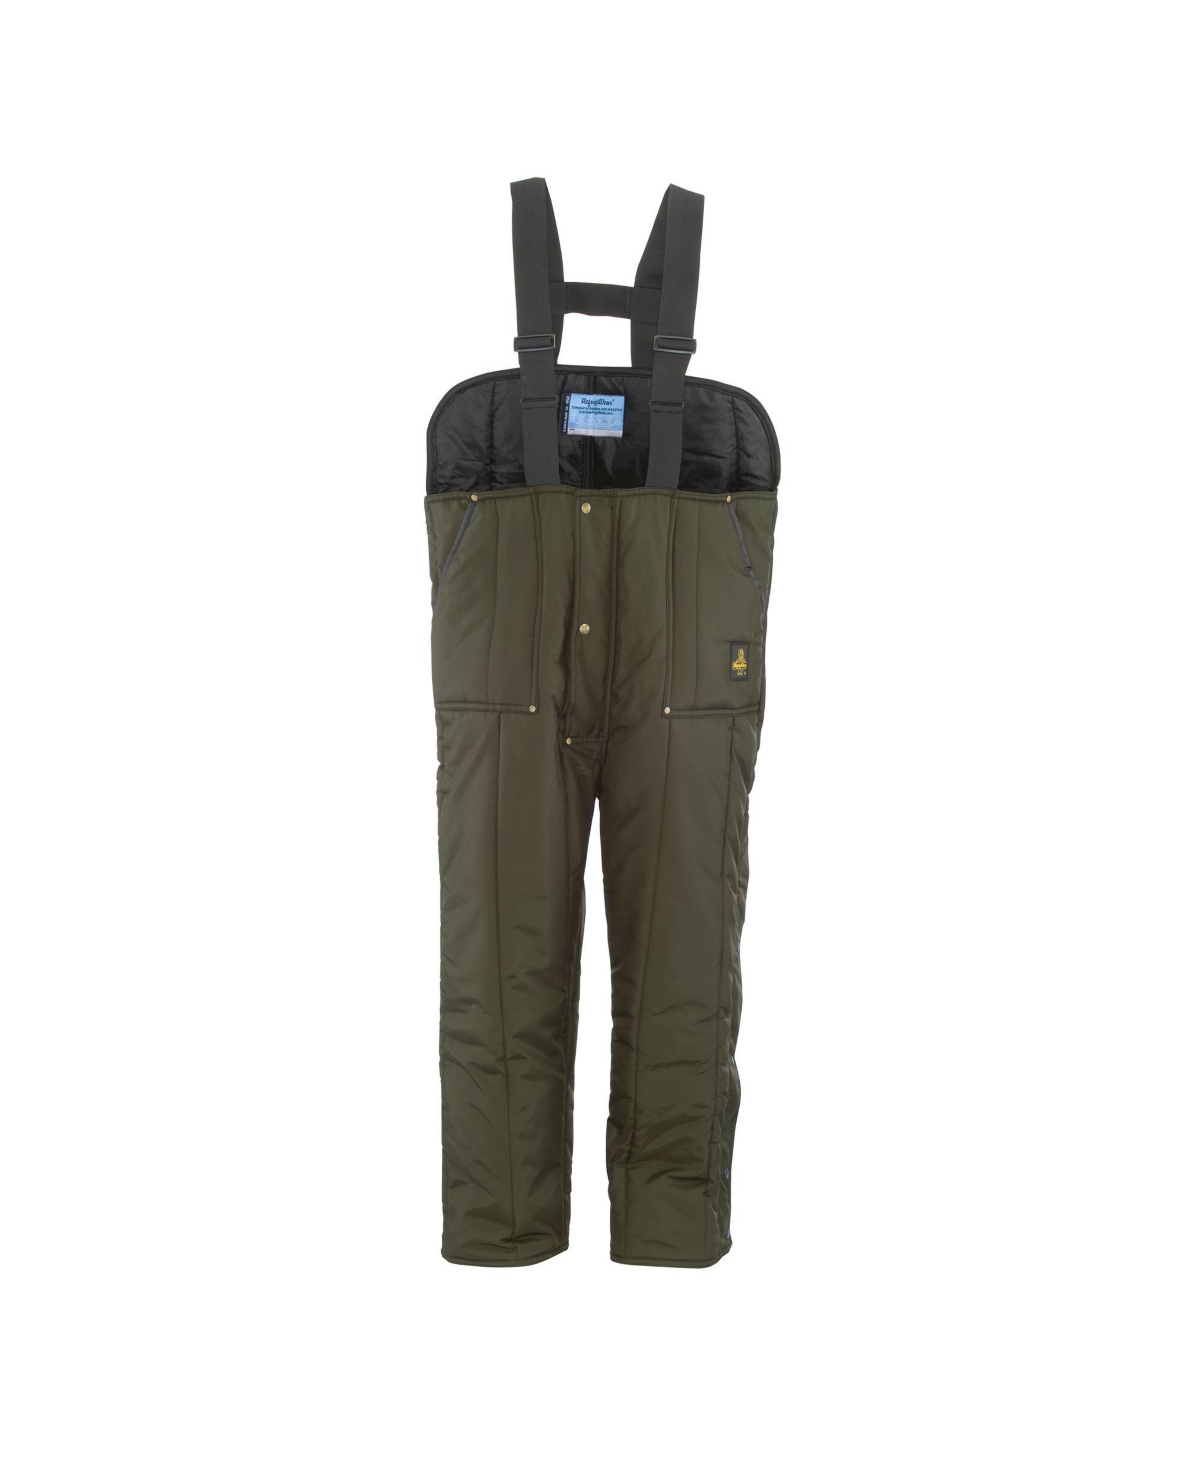 Men's Iron-Tuff Insulated Low Bib Overalls -50F Cold Protection - Sage